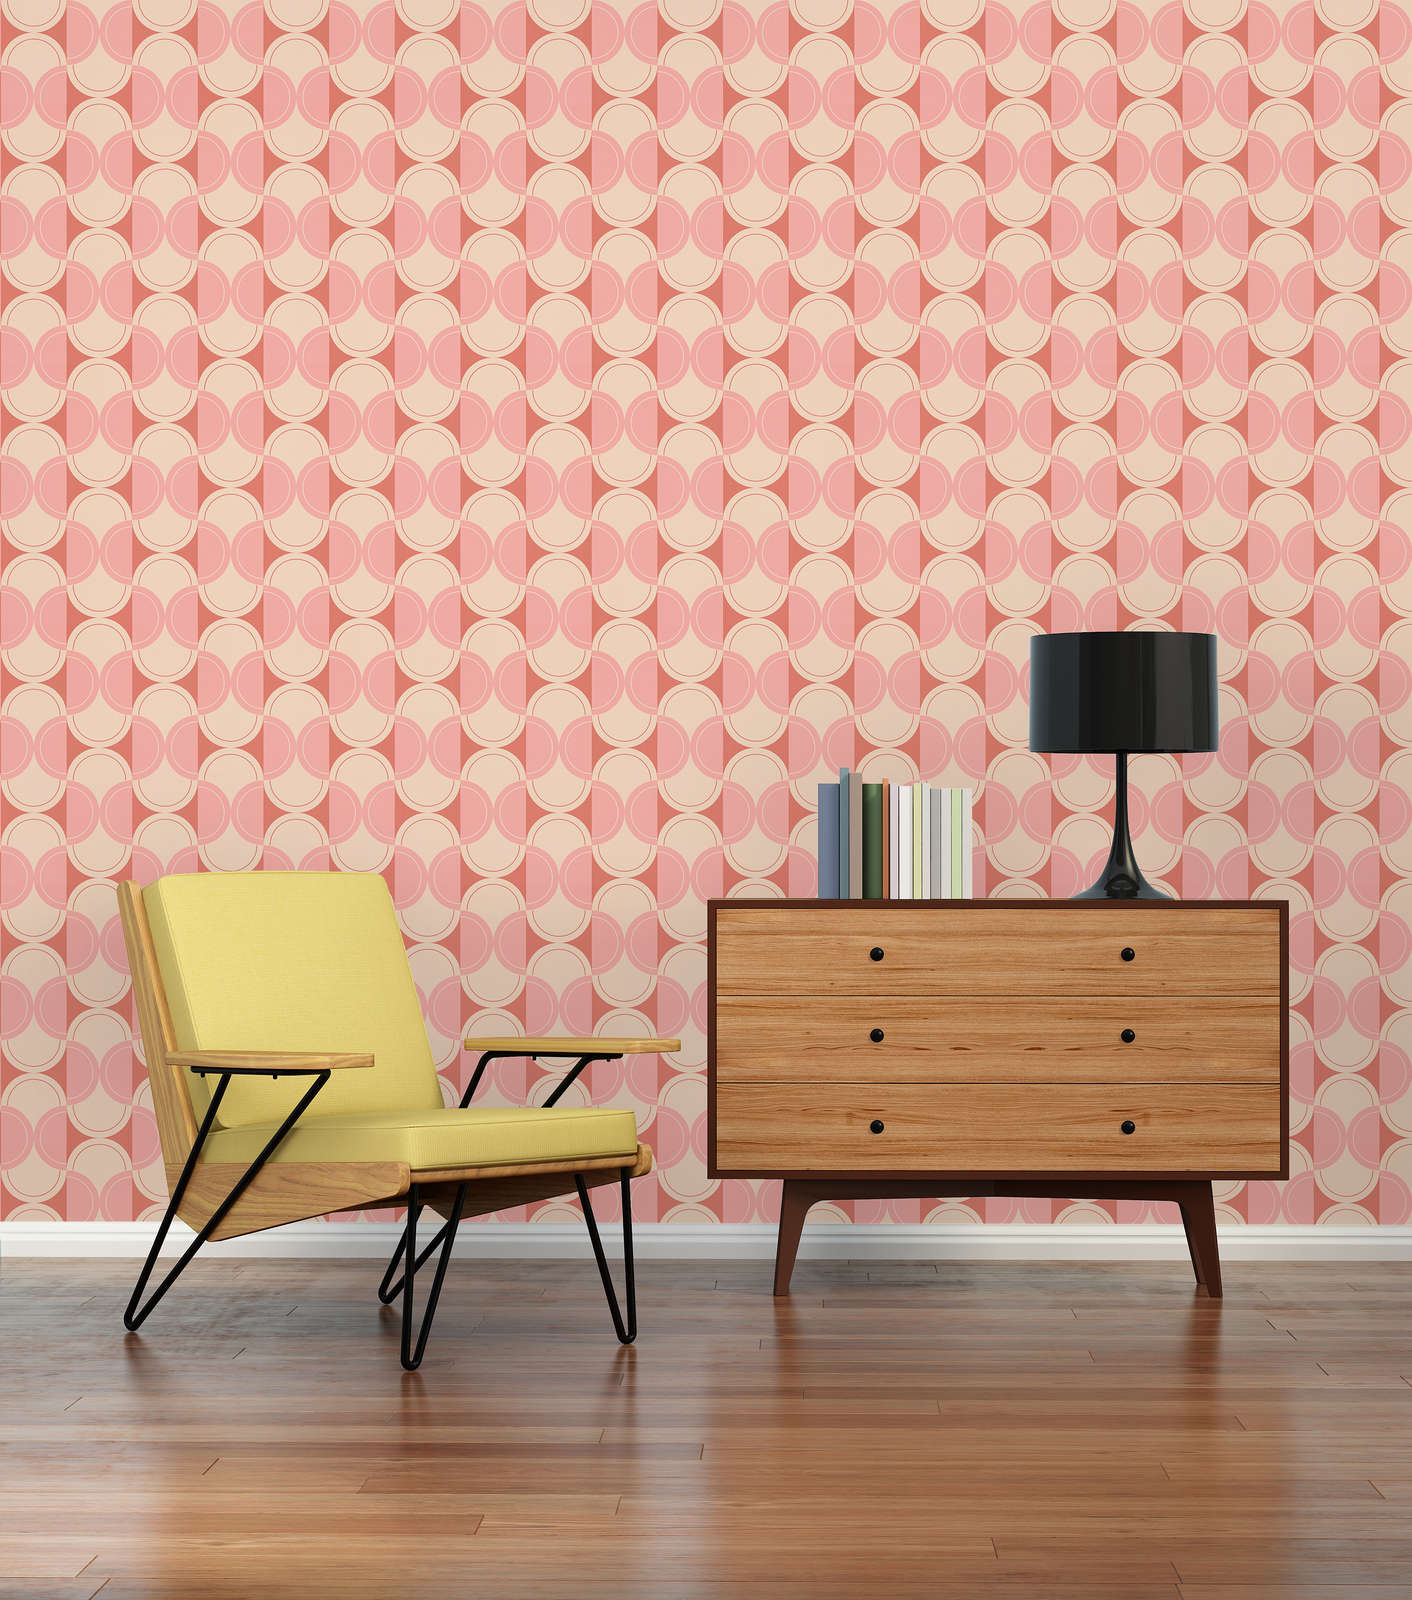             Retro non-woven wallpaper with half circle pattern - beige, pink, red
        